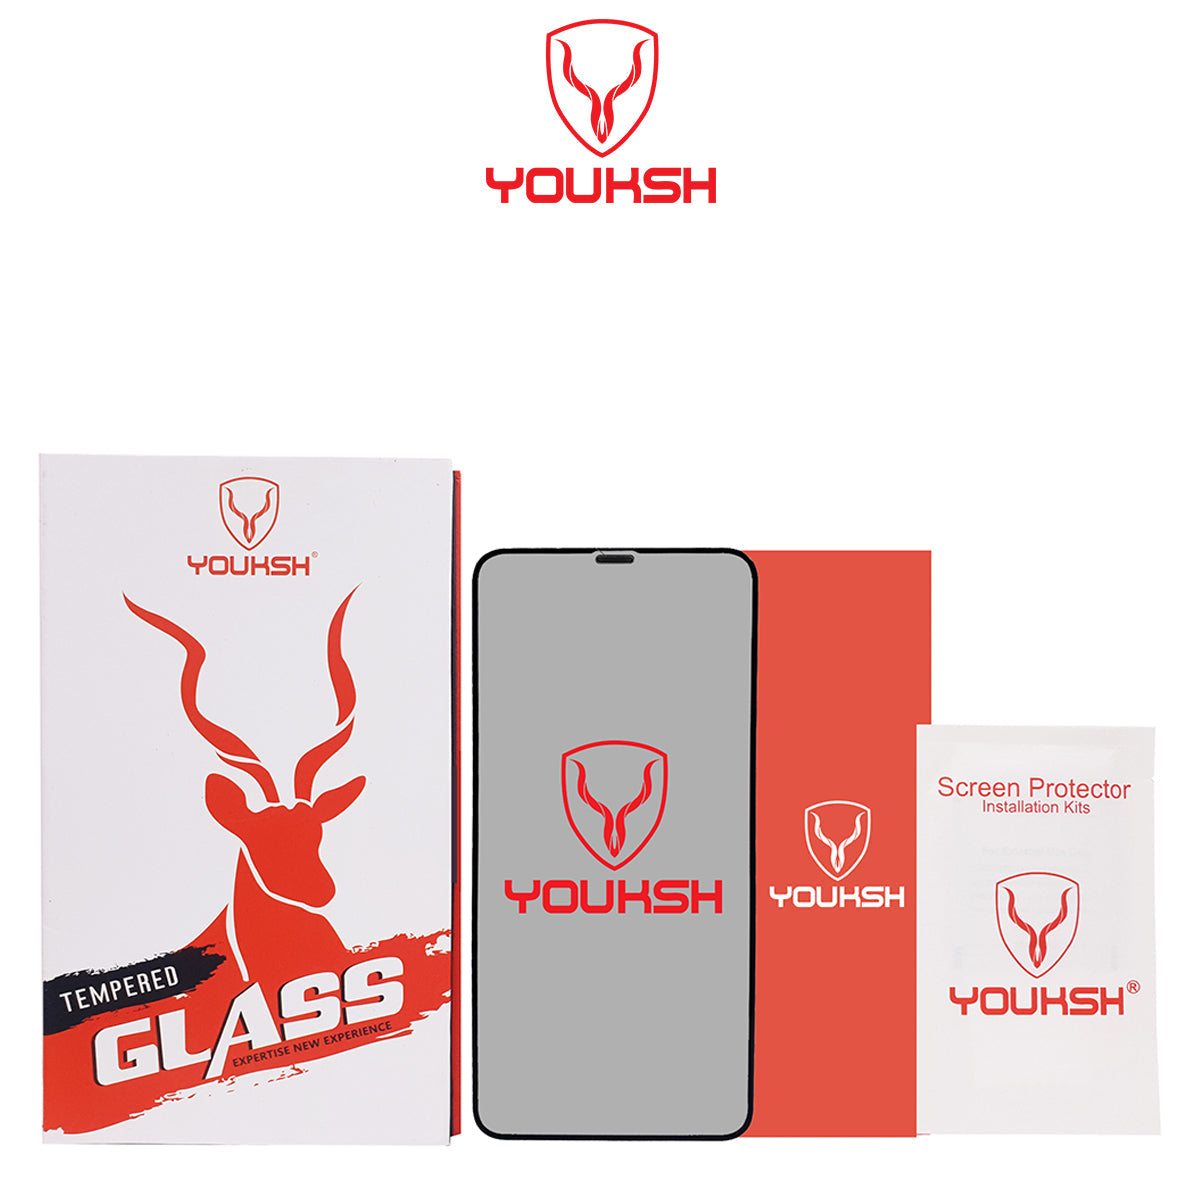 Apple iphone Xs Max - Youksh Privacy Anti Dust Glass Protector With Installation kit.